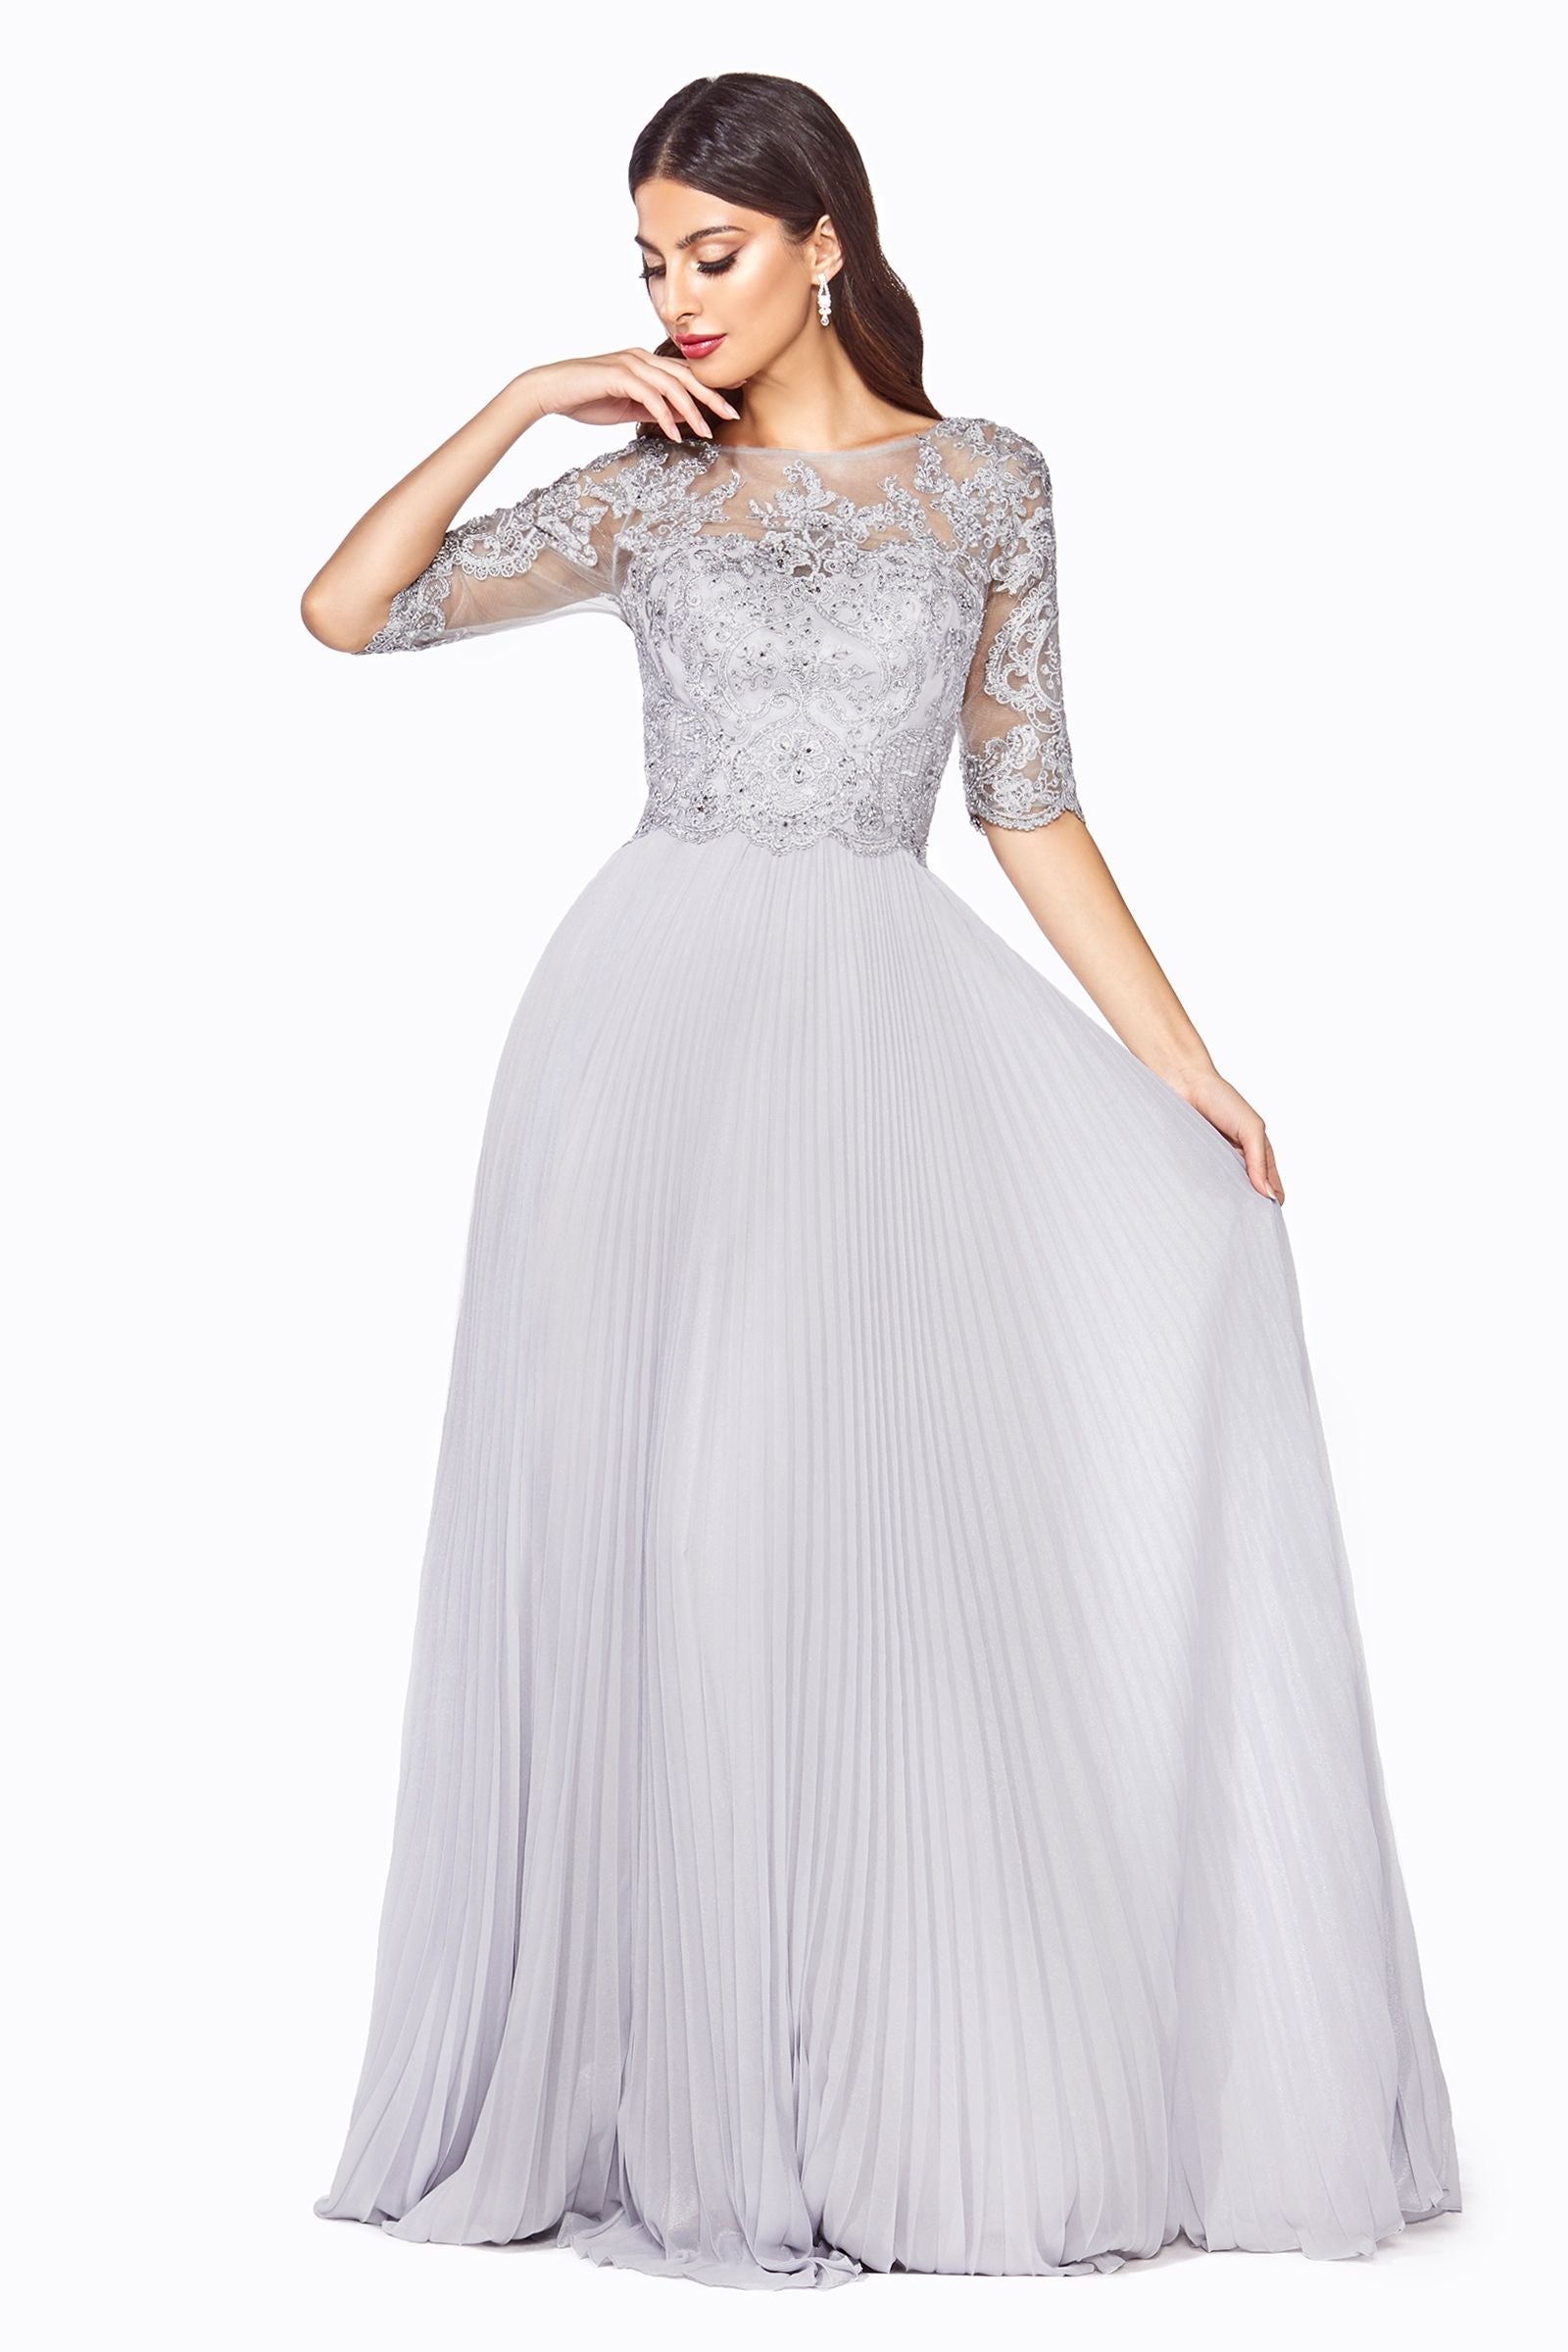 A-line dress with pleated chiffon skirt and embellished bodice-smcdress